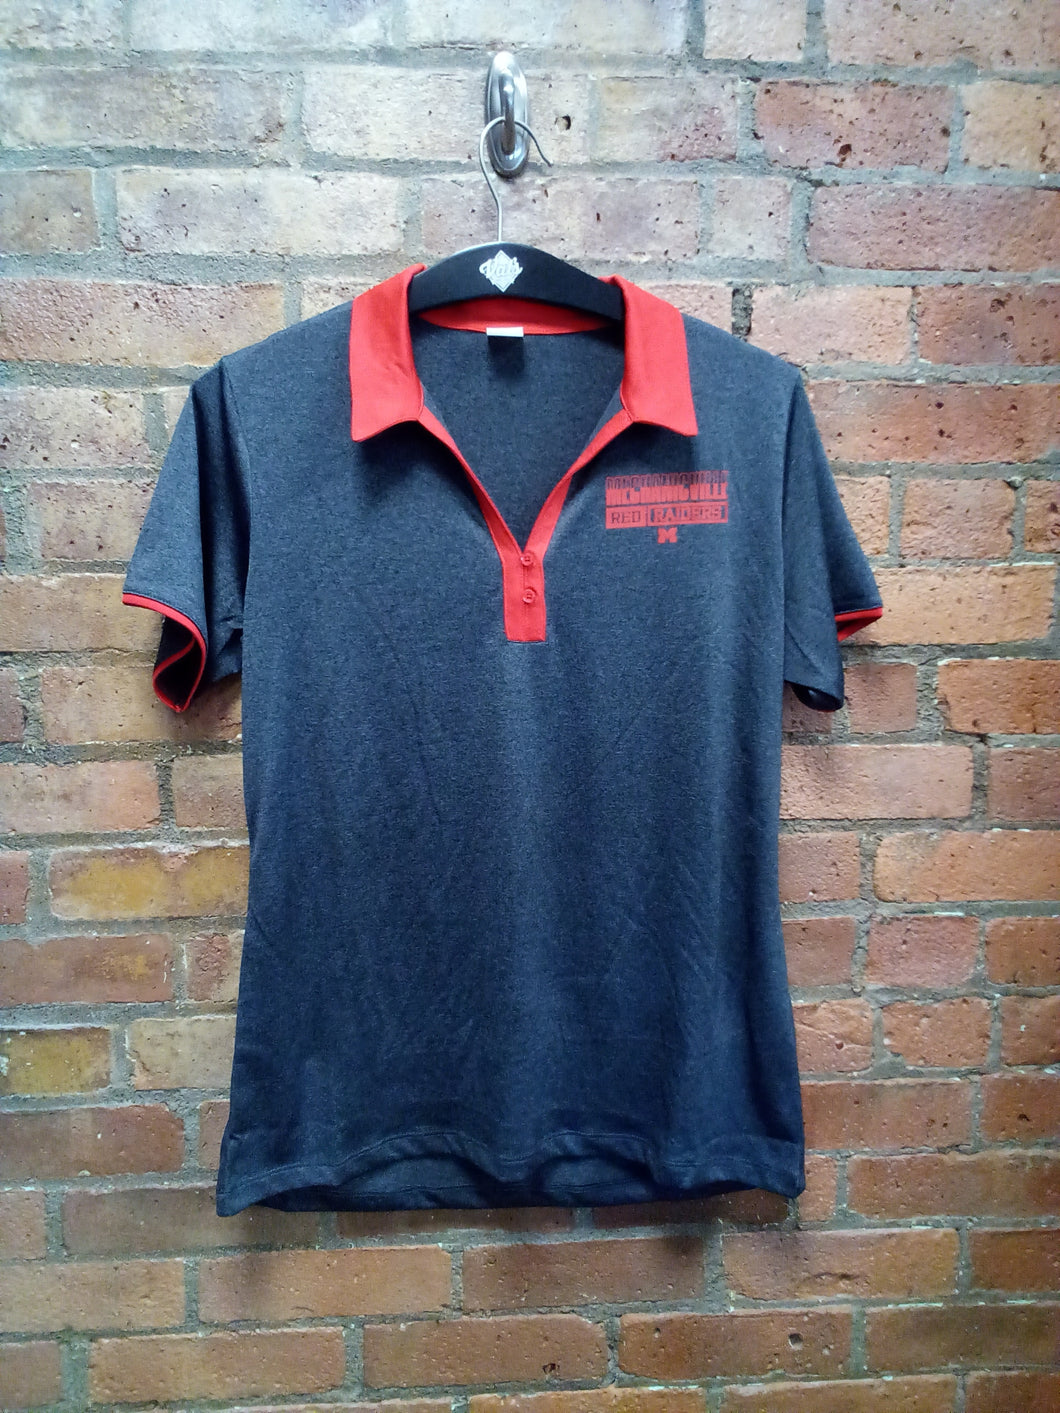 CLEARANCE - Mechanicville Red Raiders, Grey and Red Ladies Polo Shirt - Size Medium